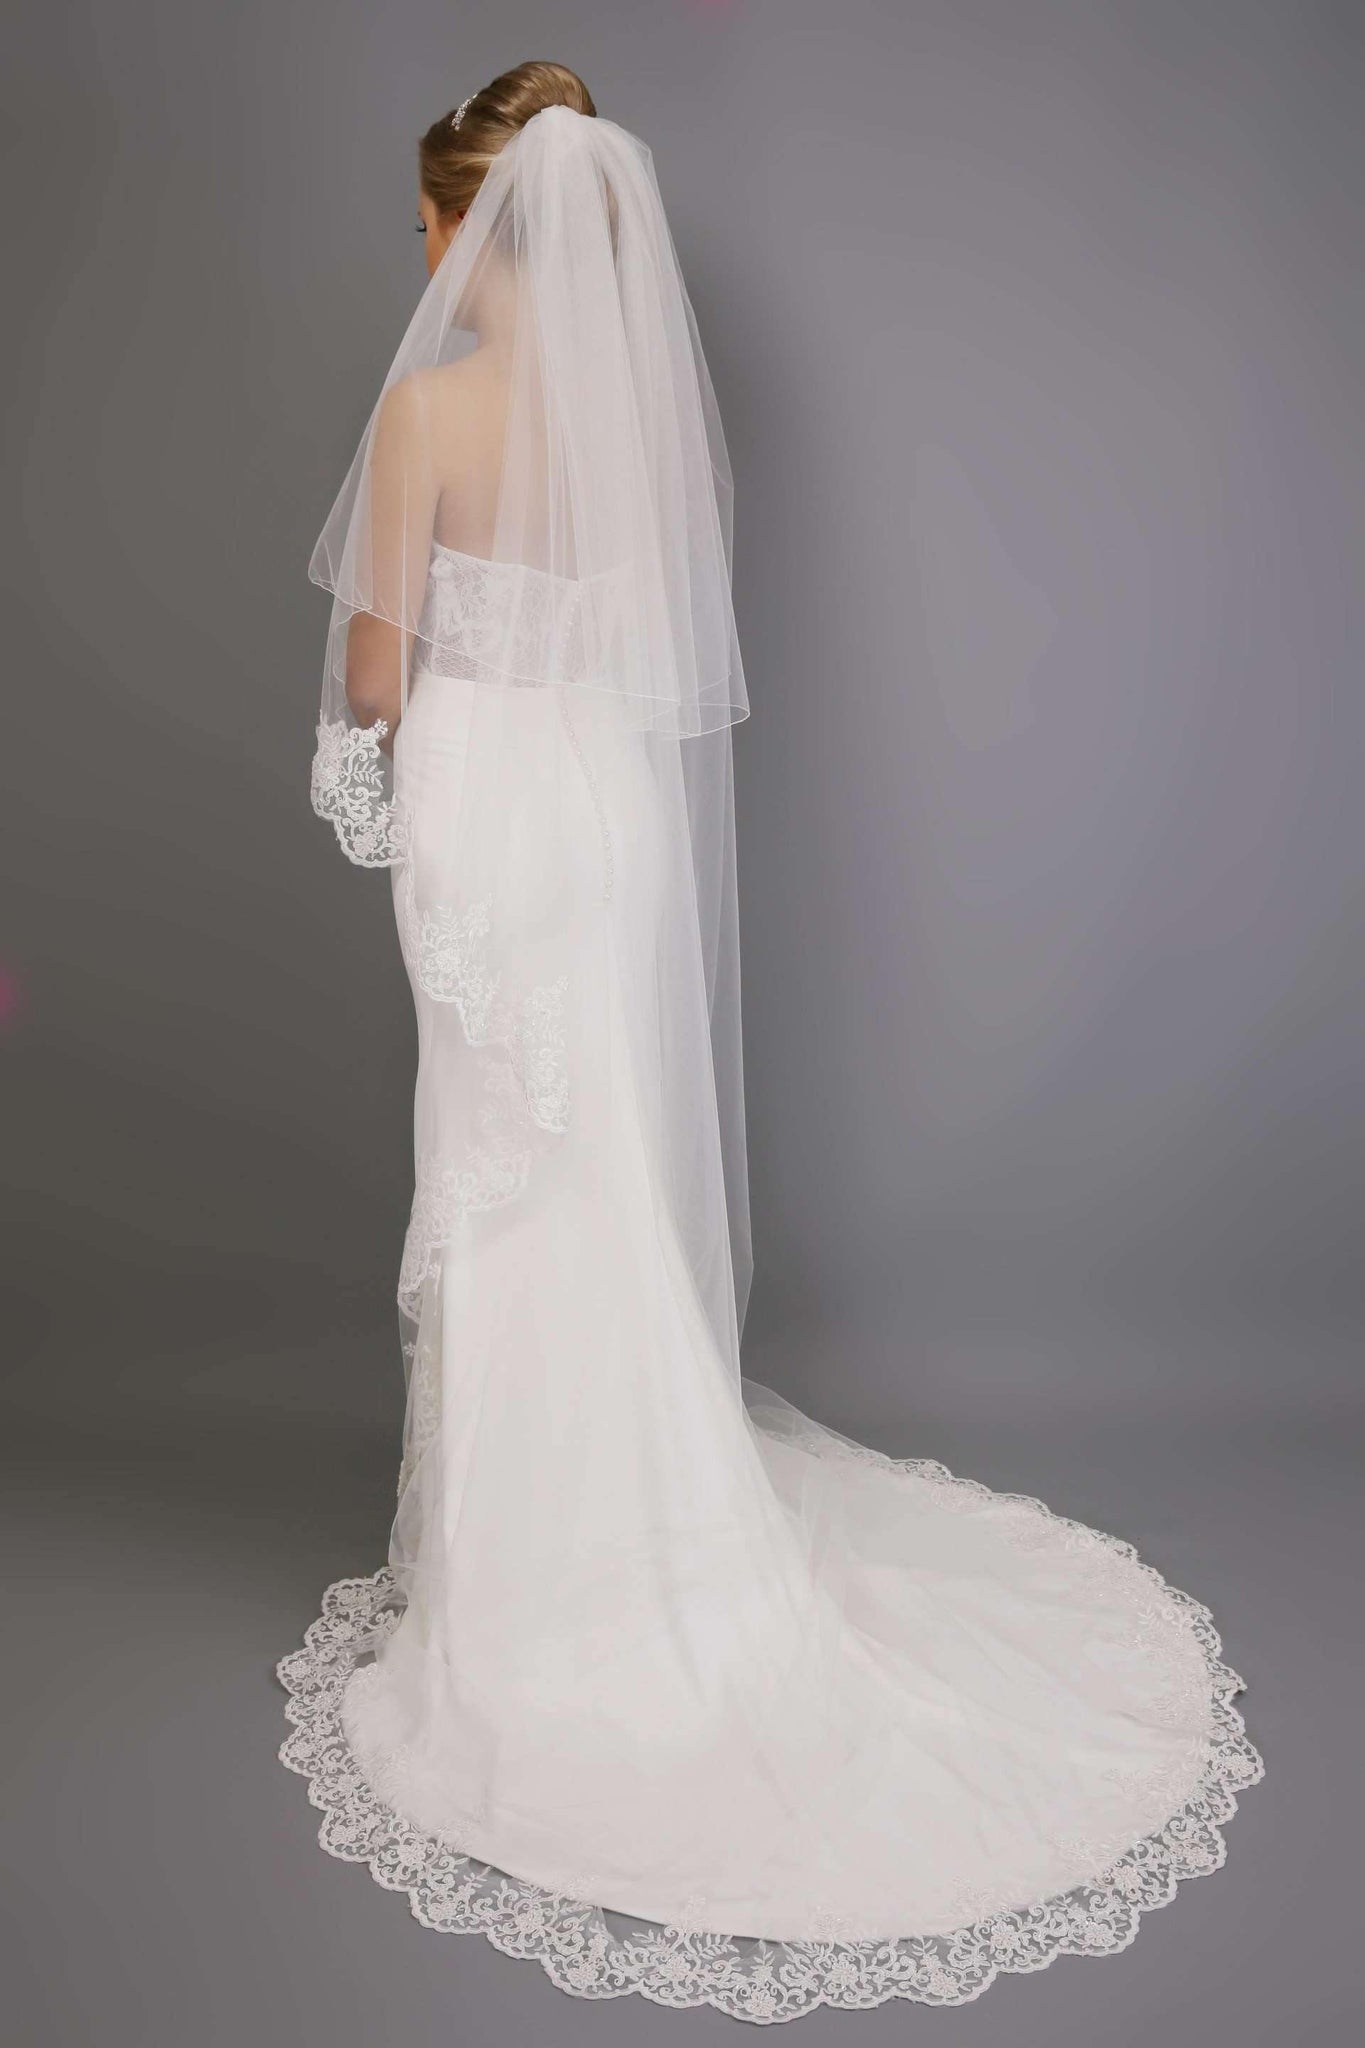 SIAN - BEADED LACE VEIL - 126" - Adore Bridal and Occasion Wear